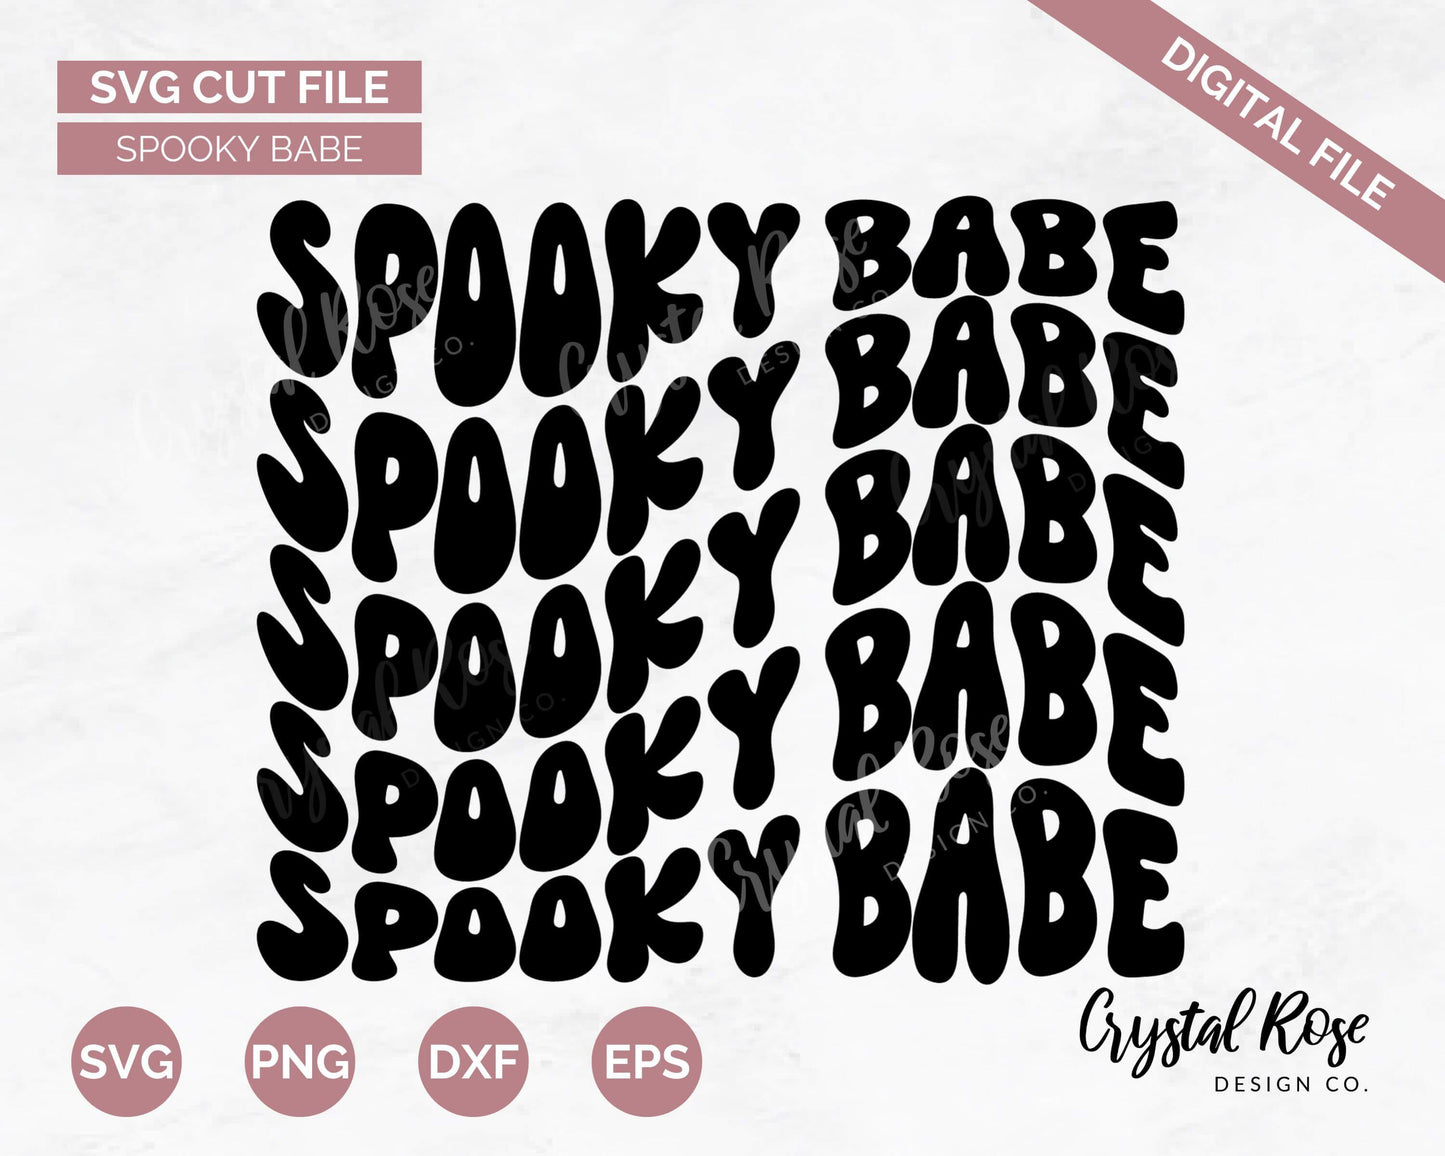 Spooky Babe SVG, Halloween SVG, Digital Download, Cricut, Silhouette, Glowforge (includes svg/png/dxf/eps) - Crystal Rose Design Co.